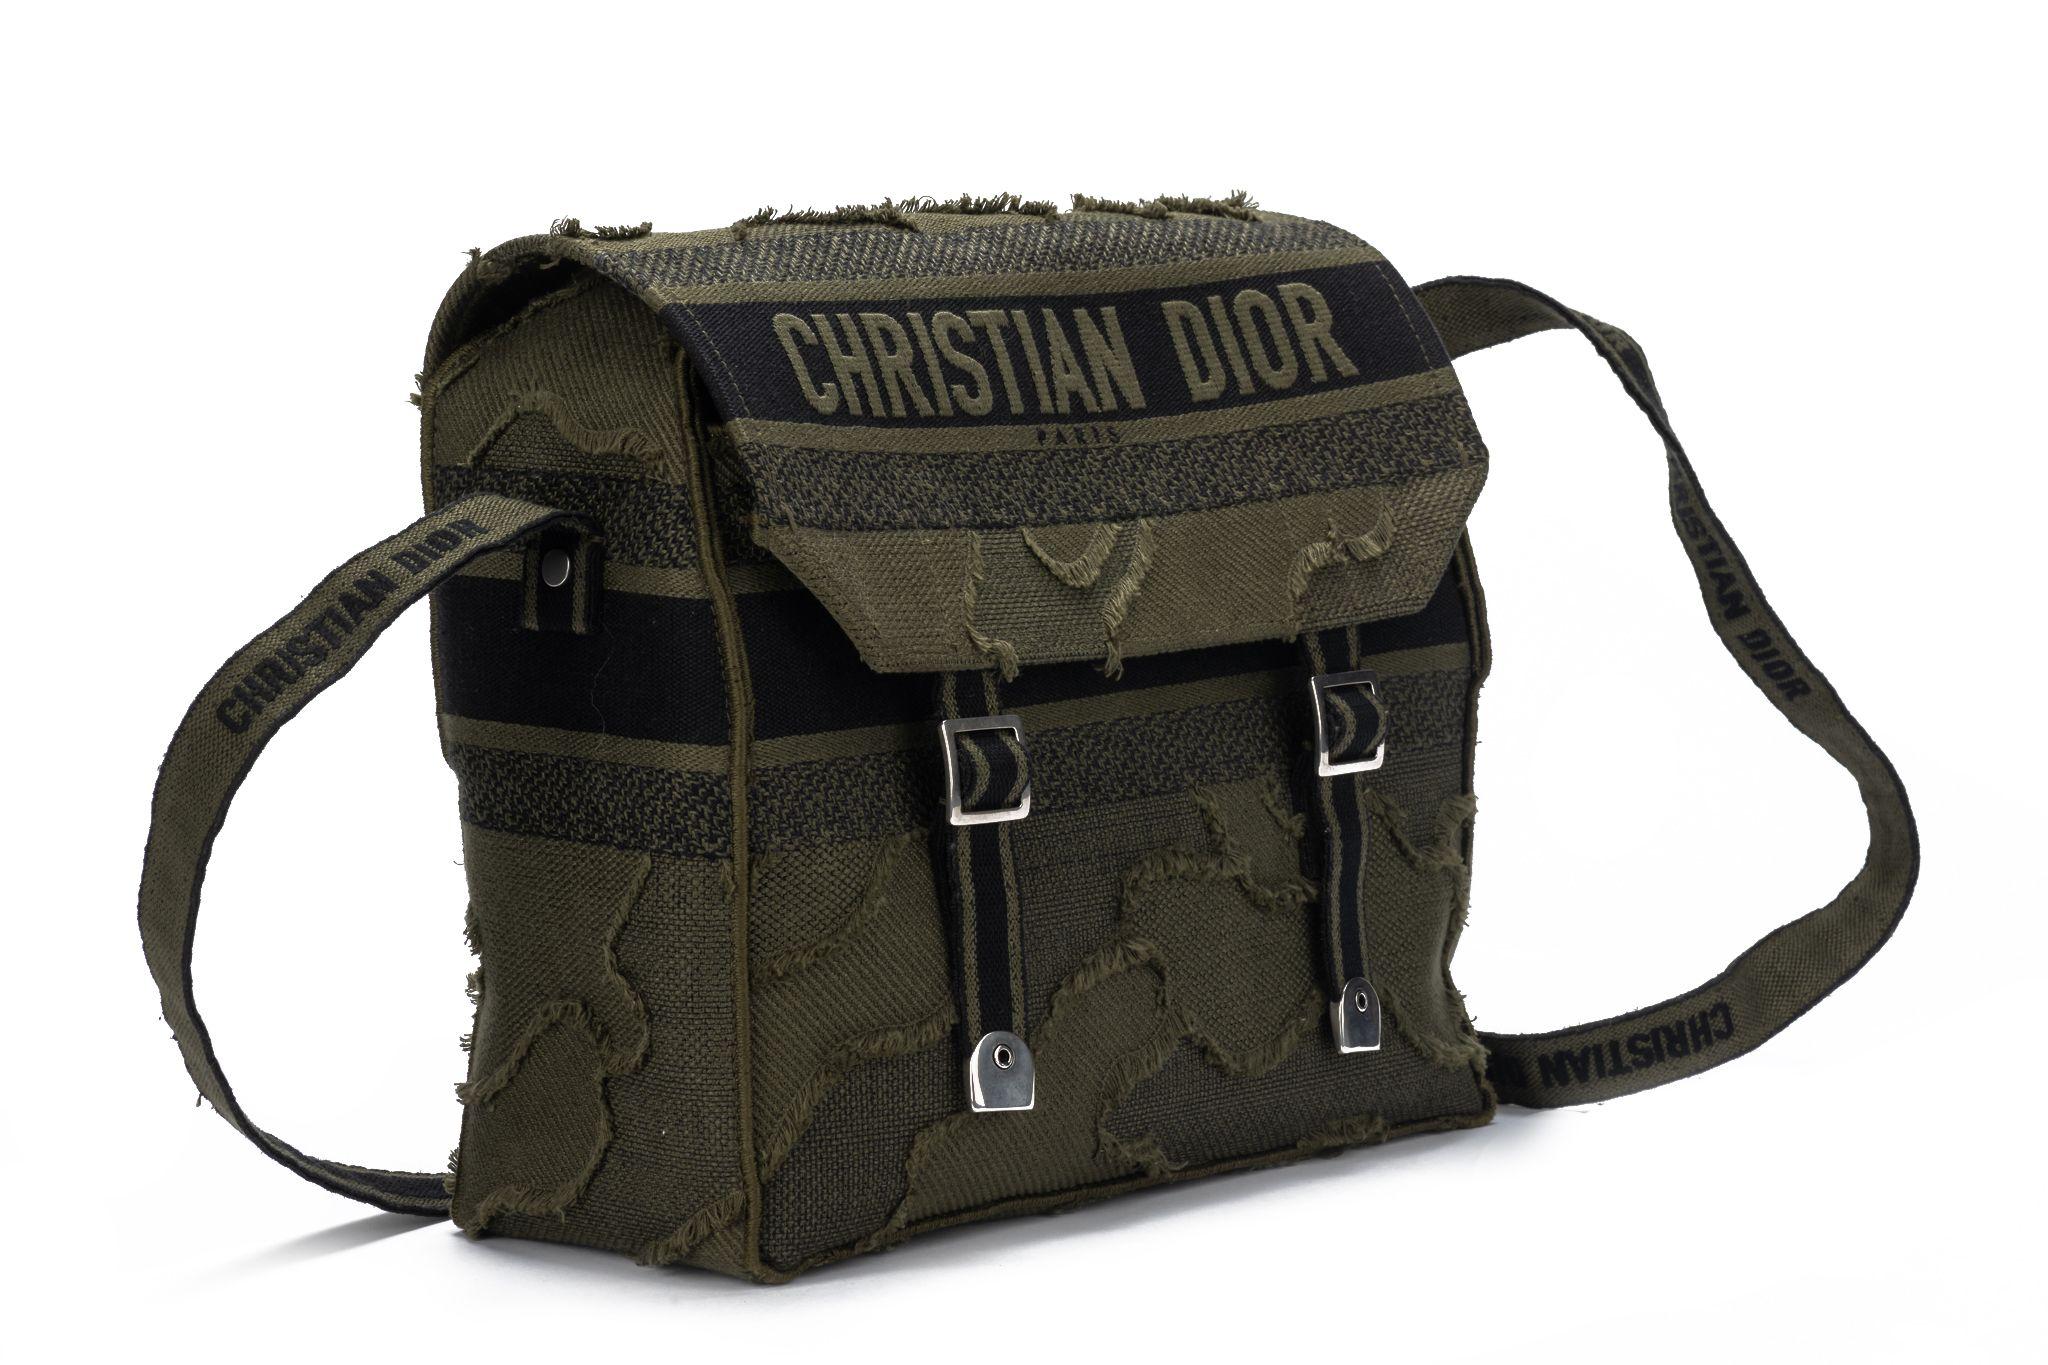 CHRISTIAN DIOR brand new Canvas Embroidered Camouflage Dior Messenger Bag in Green. This flap bag is finely crafted of dark green and black canvas with a unique design and adorned with 